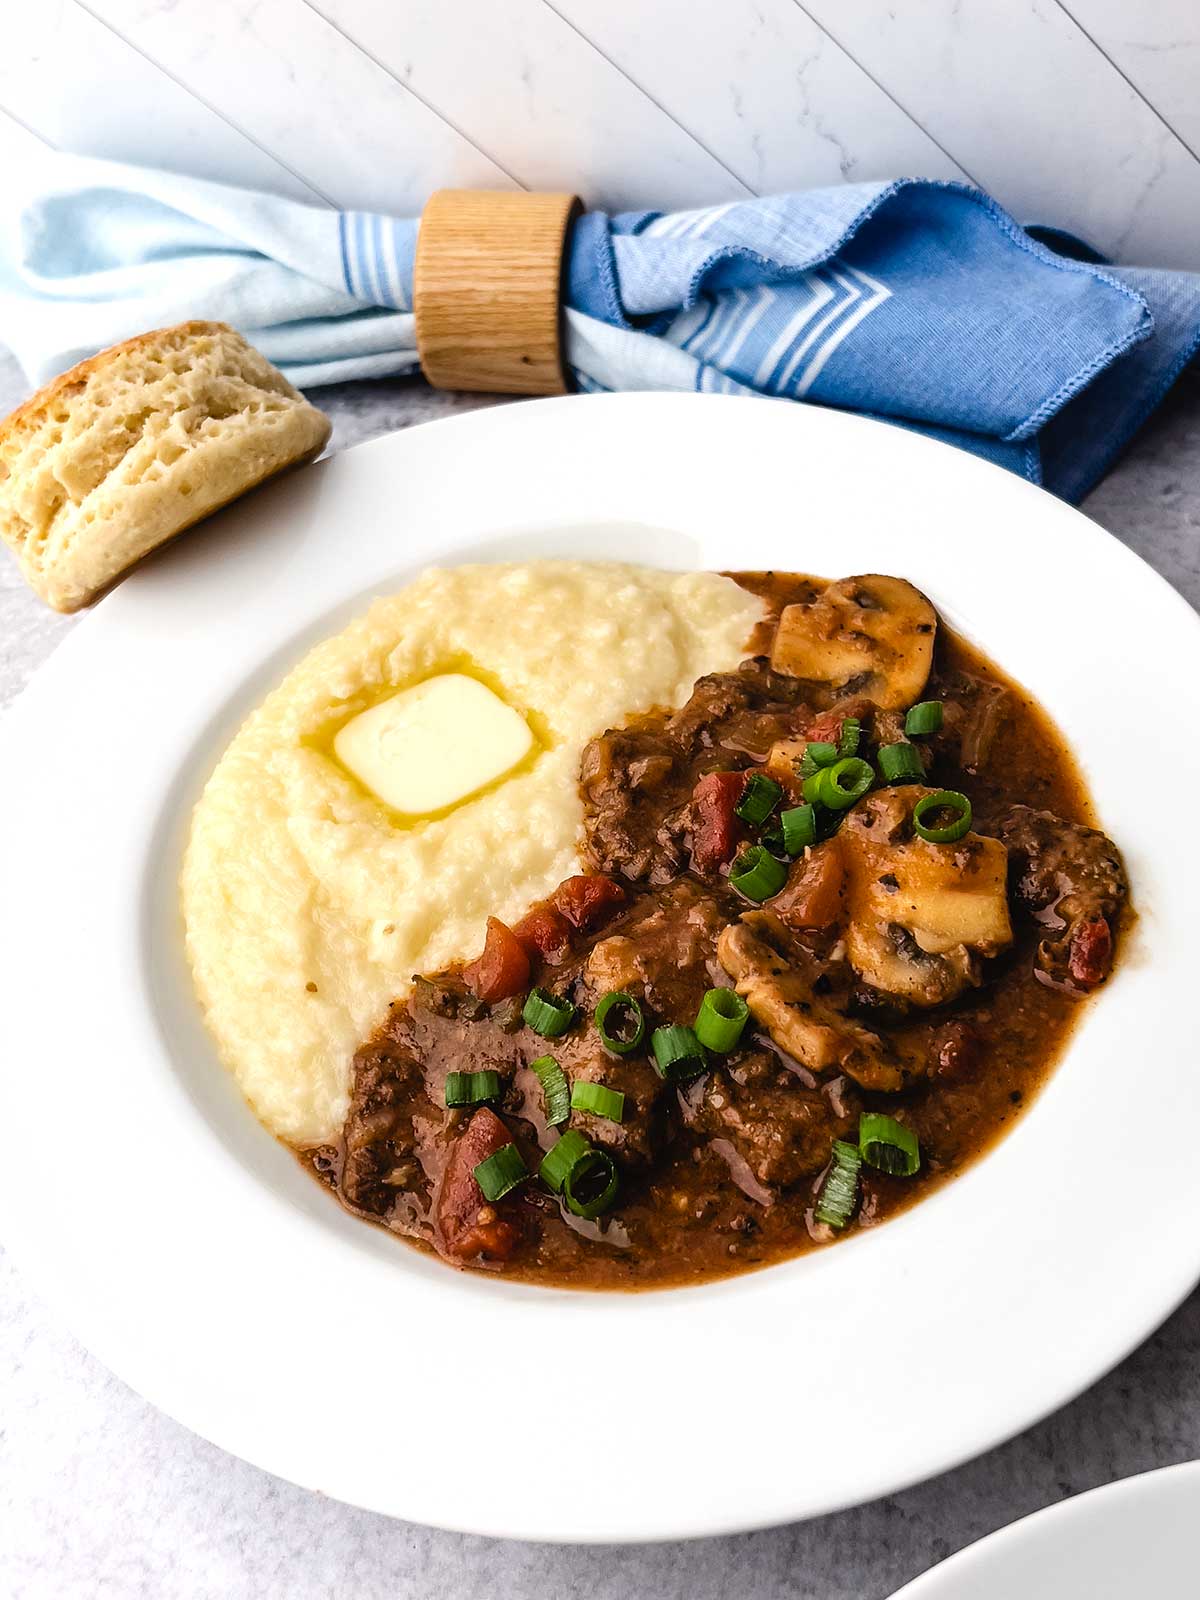 Beef Grillades with smoked gouda grits.